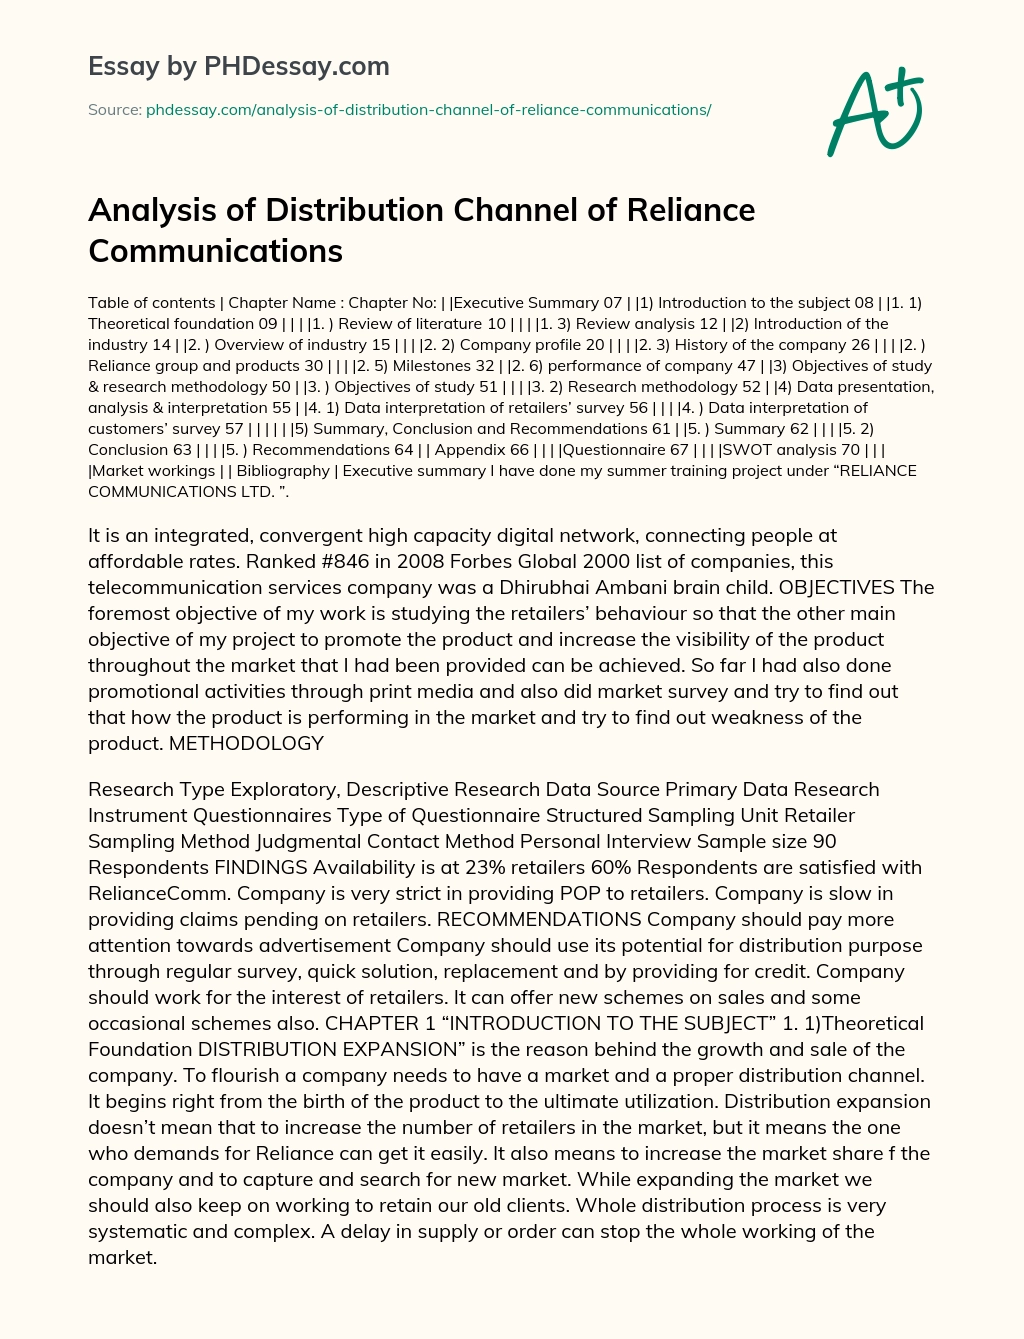 Analysis of Distribution Channel of Reliance Communications essay